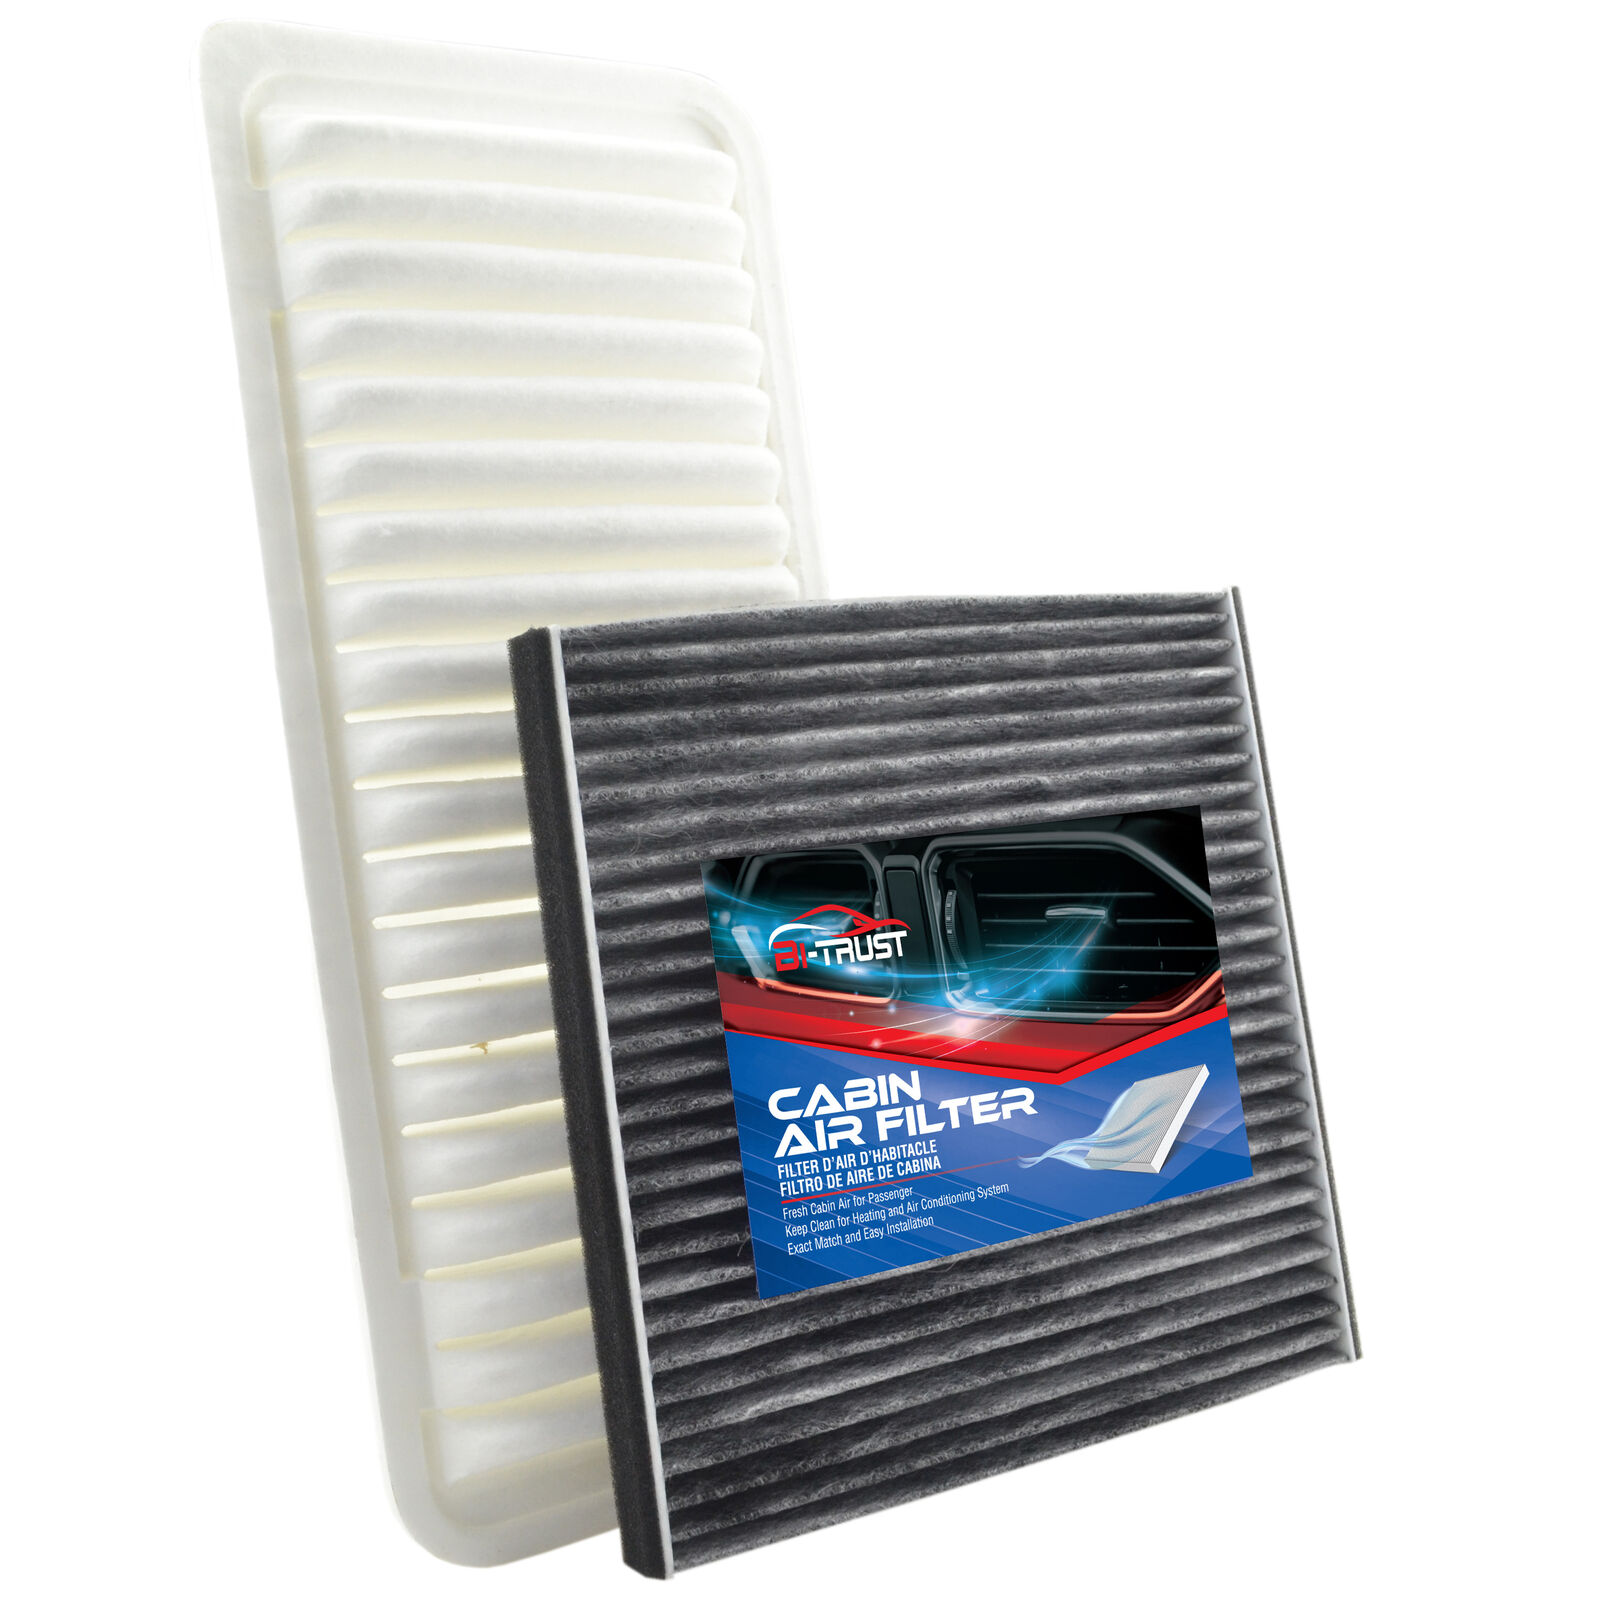 Engine and Cabin Air Filter for Lexus RX400H 2006-2008 V6 3.3L17801-20050